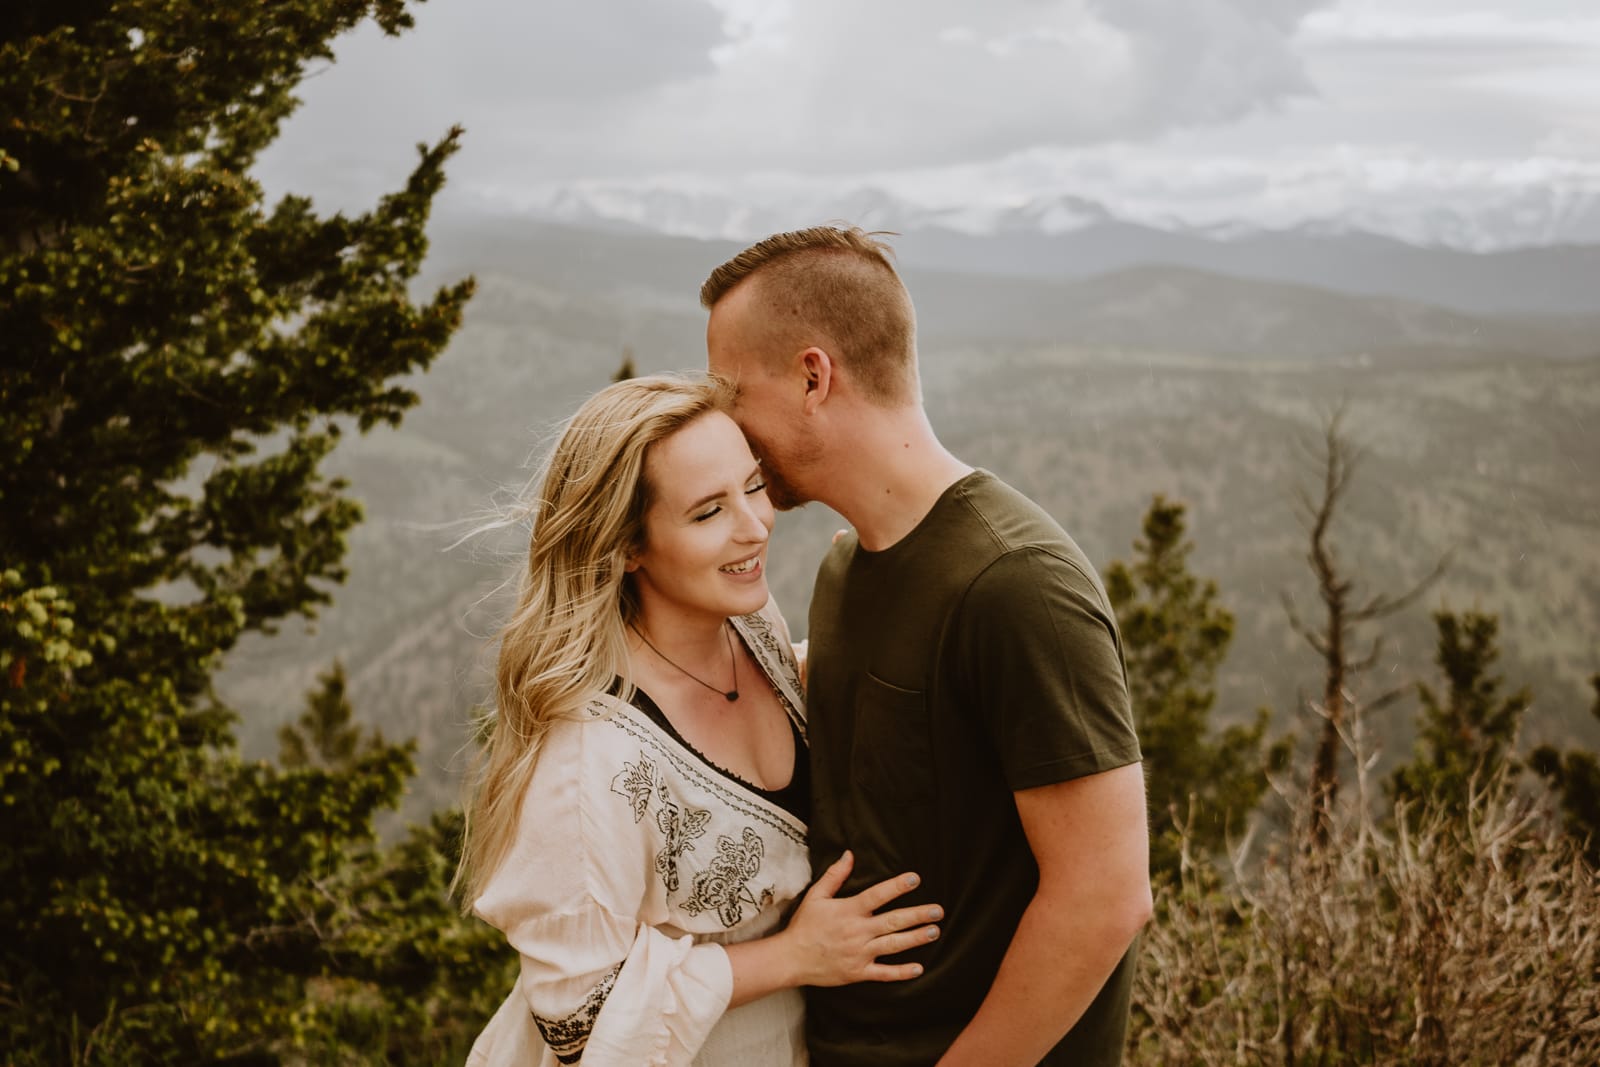 Adorable couple giggles and snuggle into each other during their moody mountain couples portrait shoot in Colorado